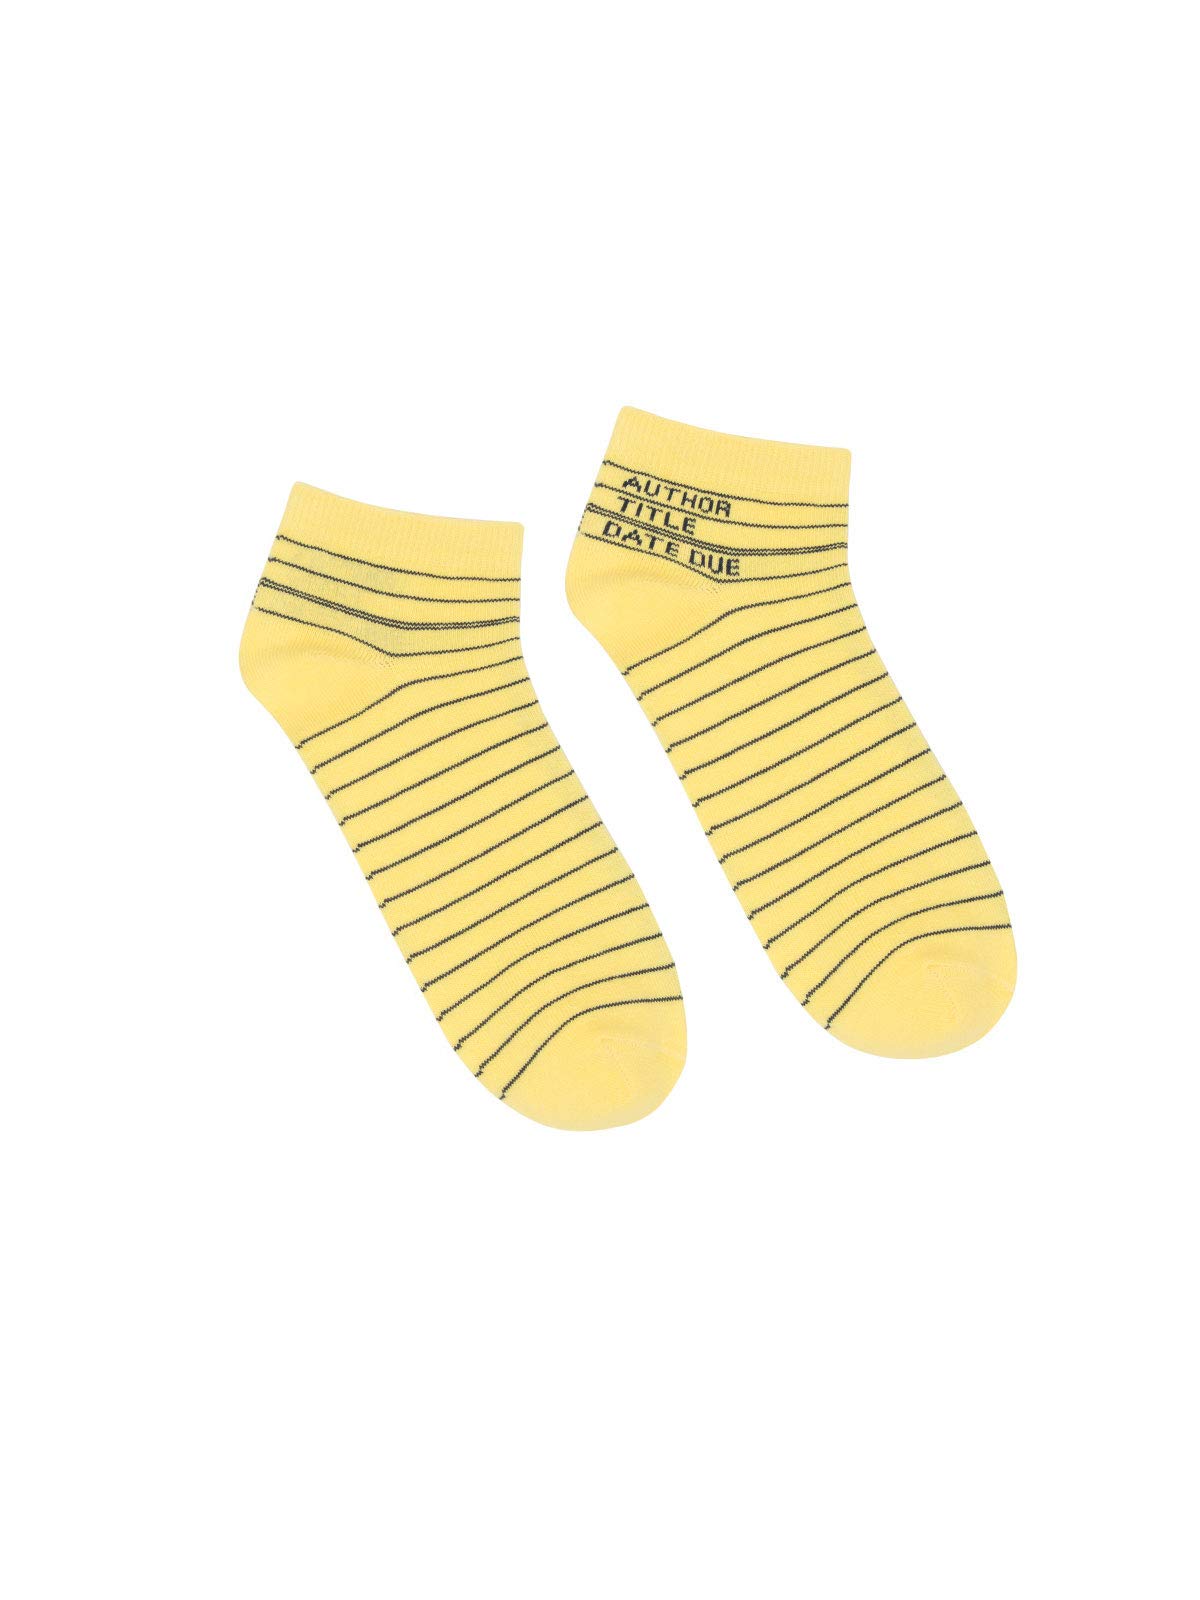 Out of Print Library Card Ankle Socks 4-pack Unisex Large